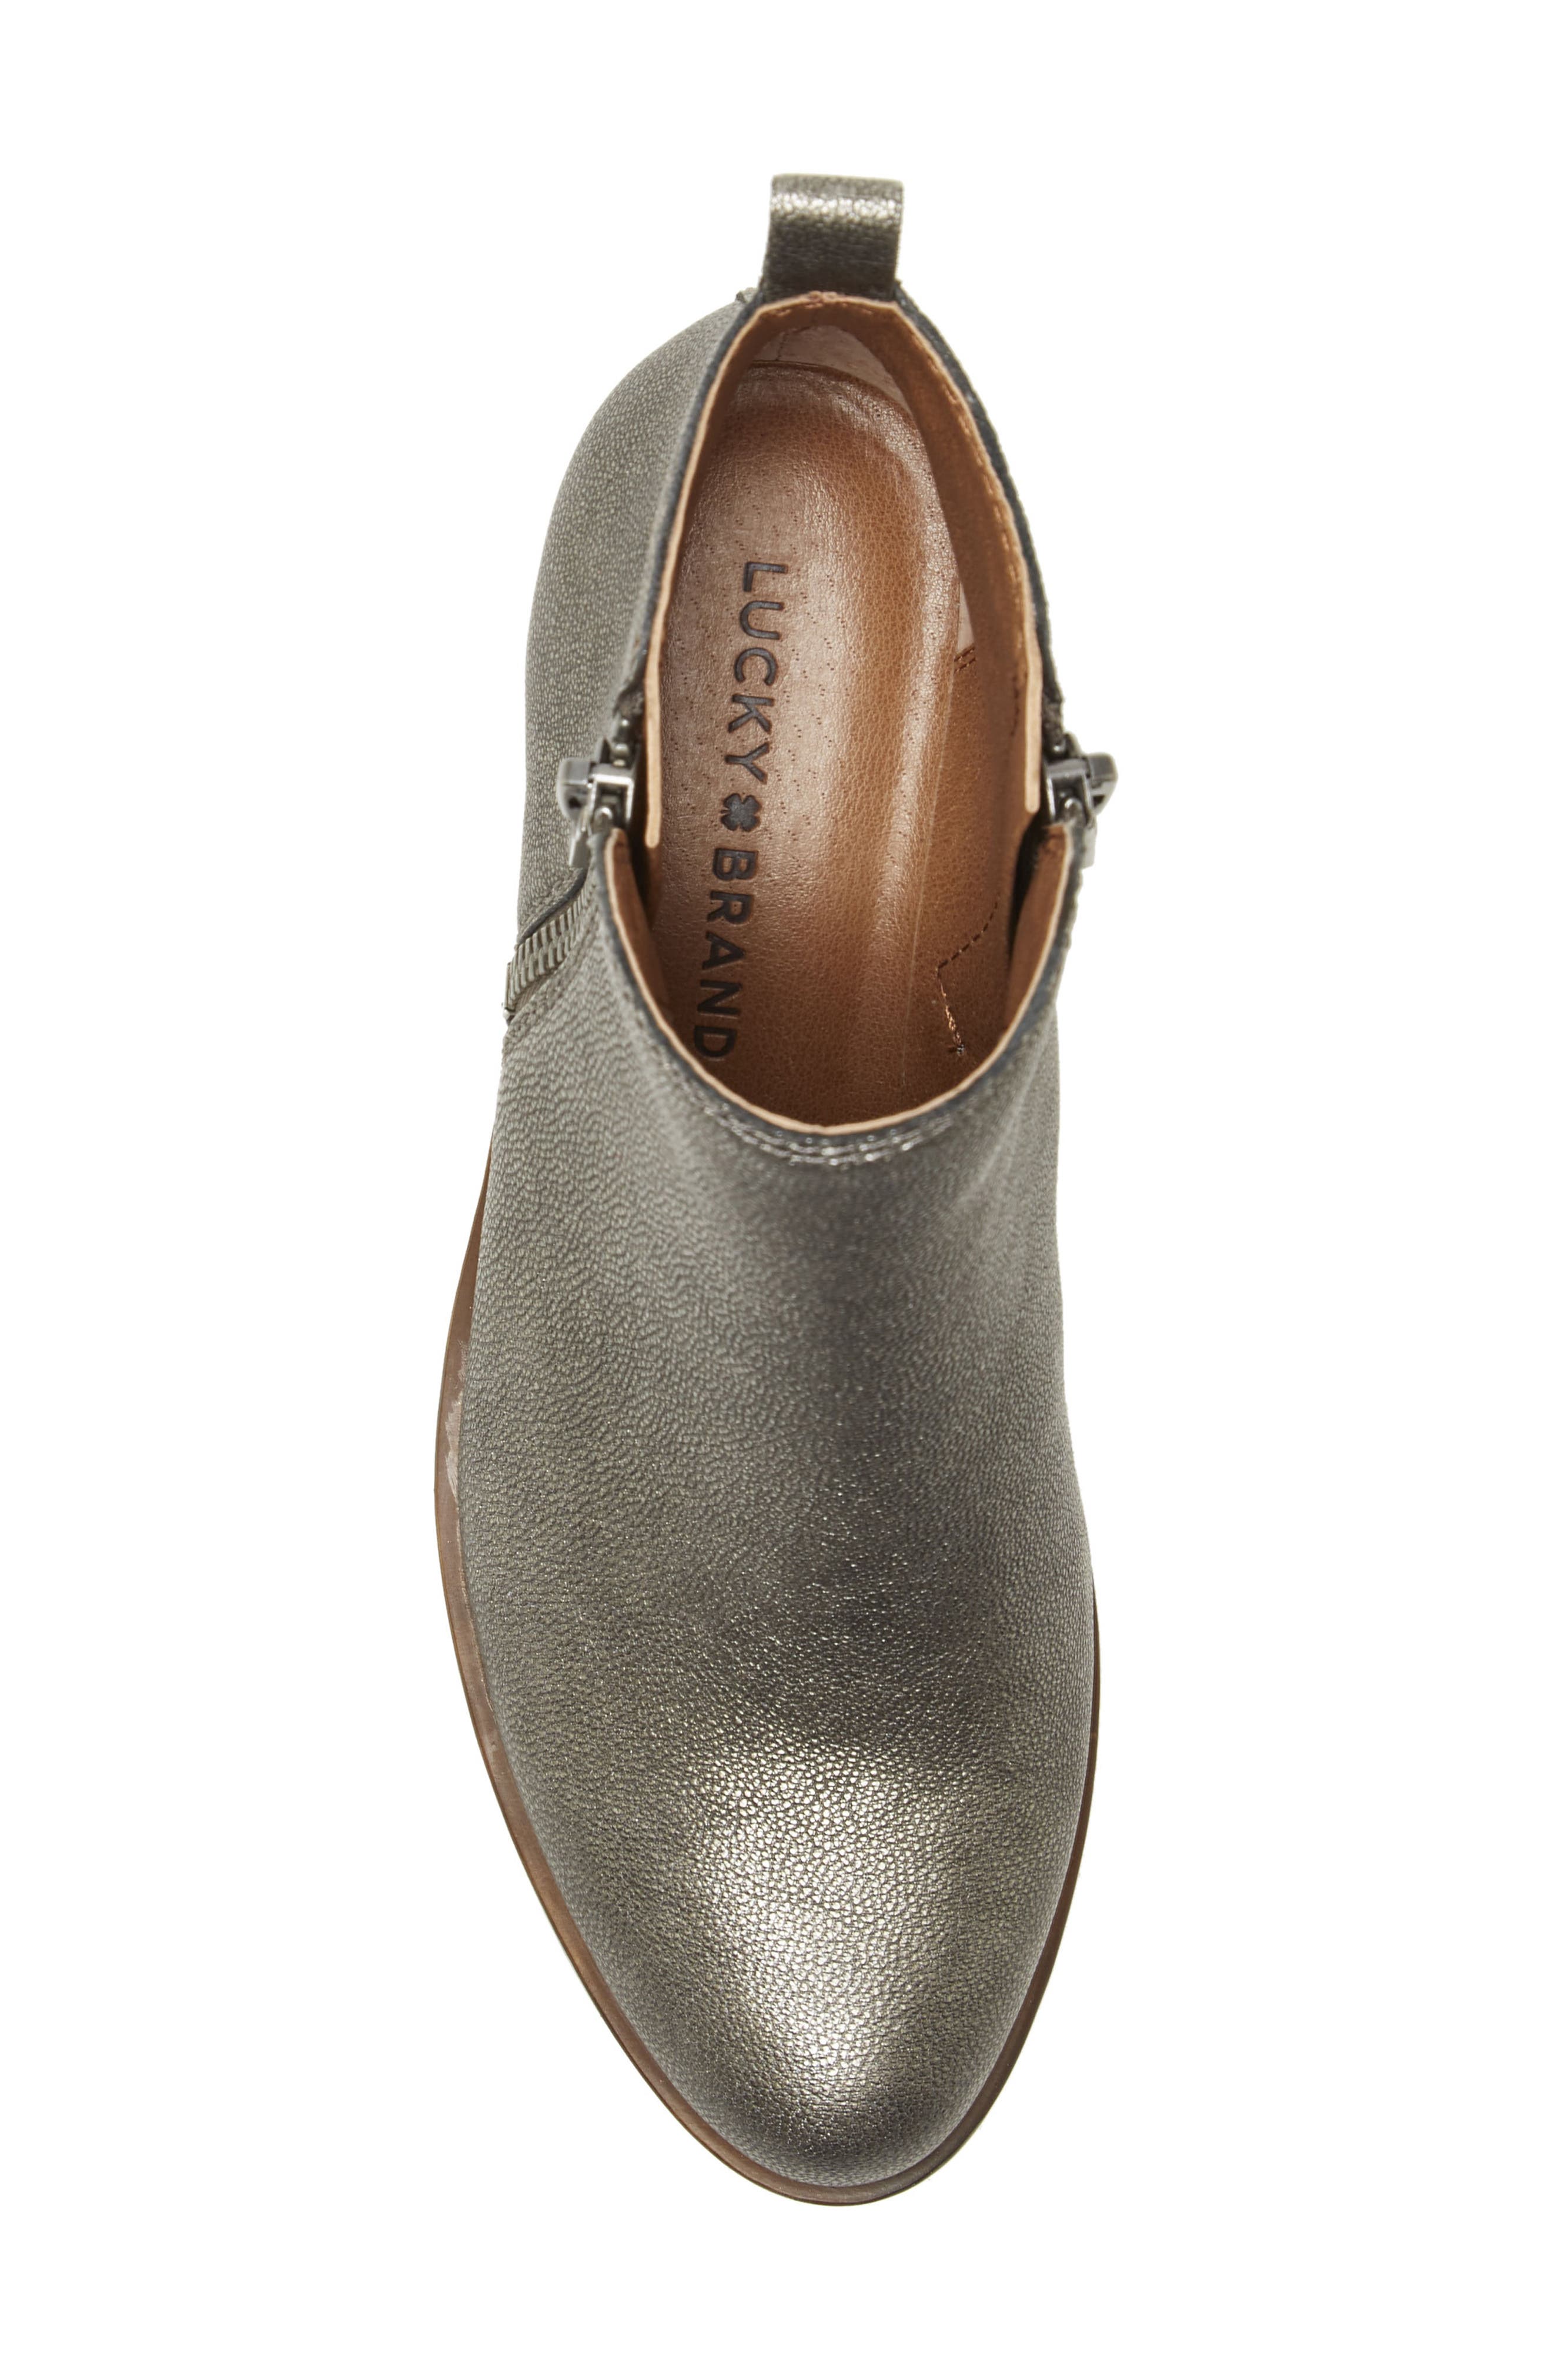 lucky brand basel bootie pewter